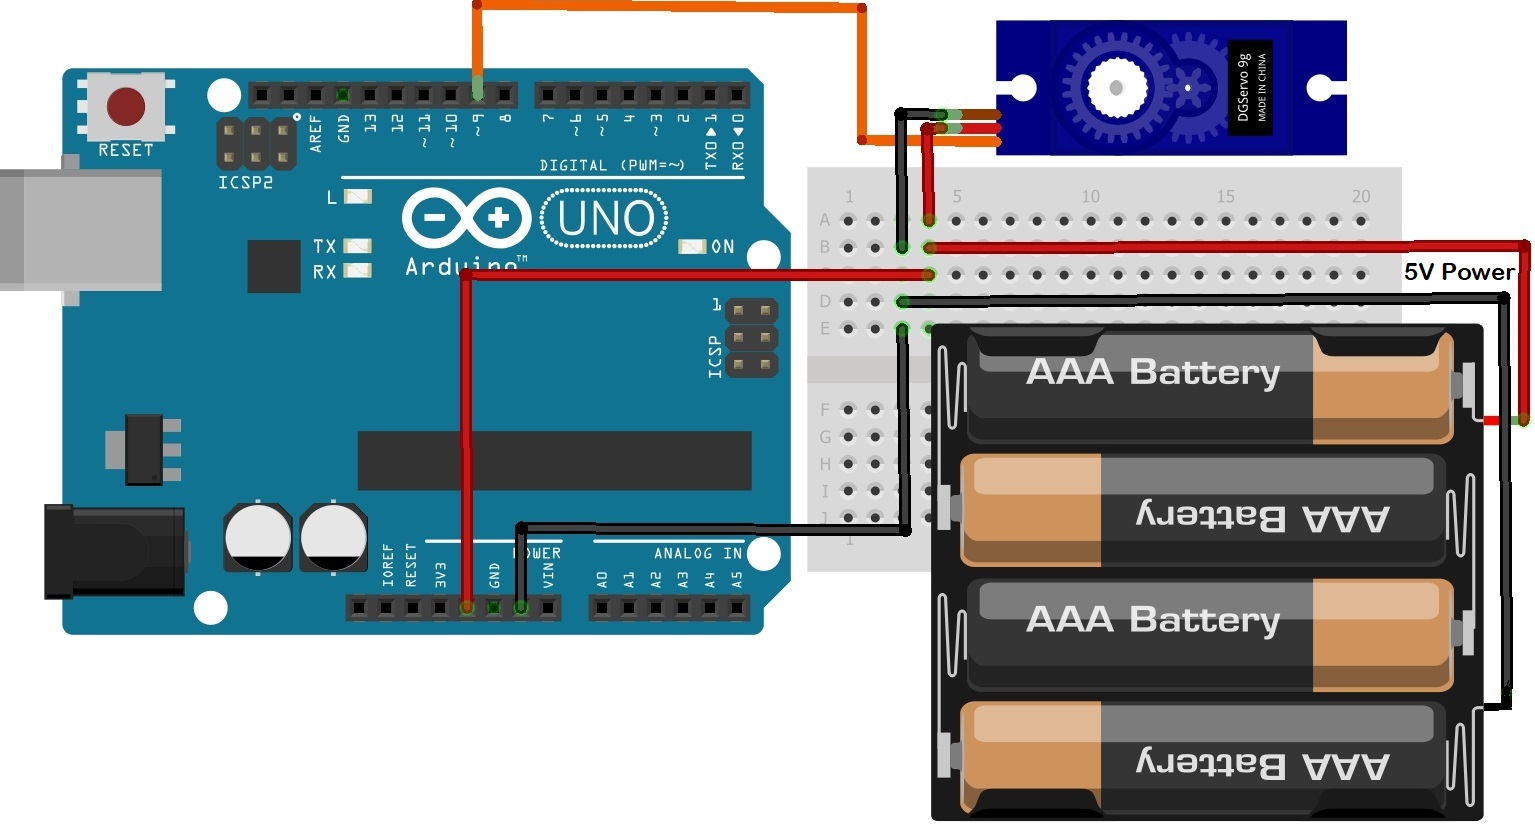 How to Control Servos With the Arduino - Circuit Basics